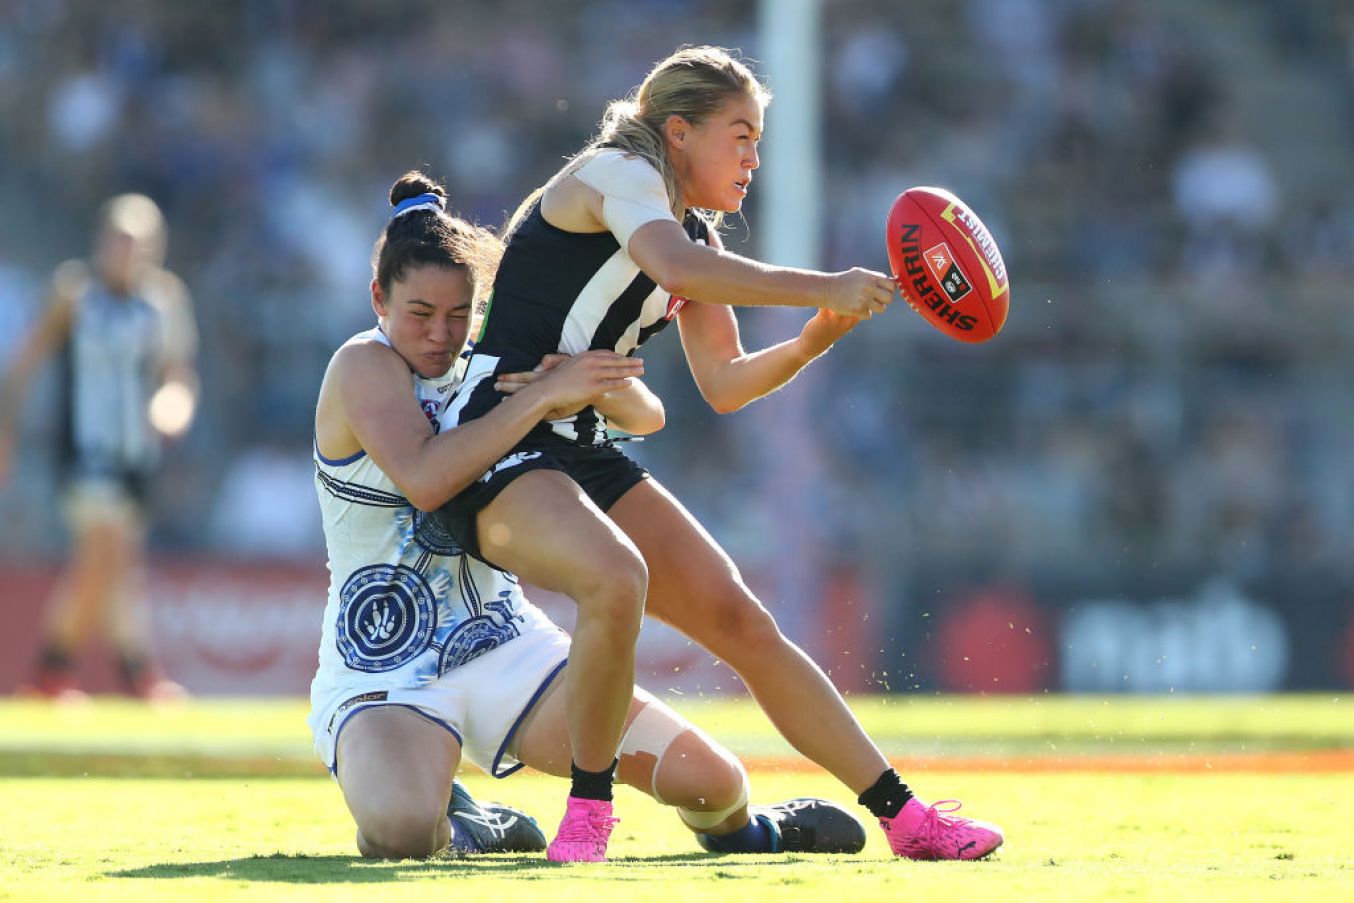 Sarah Rowe (Mayo) Handballs As She Is Tackled By Danielle Hardiman During A Meeting Of The Collingwood Magpies And The North Melbourne Kangaroos. (Photo By Kelly Defina/Afl Photos/Via Getty Images)